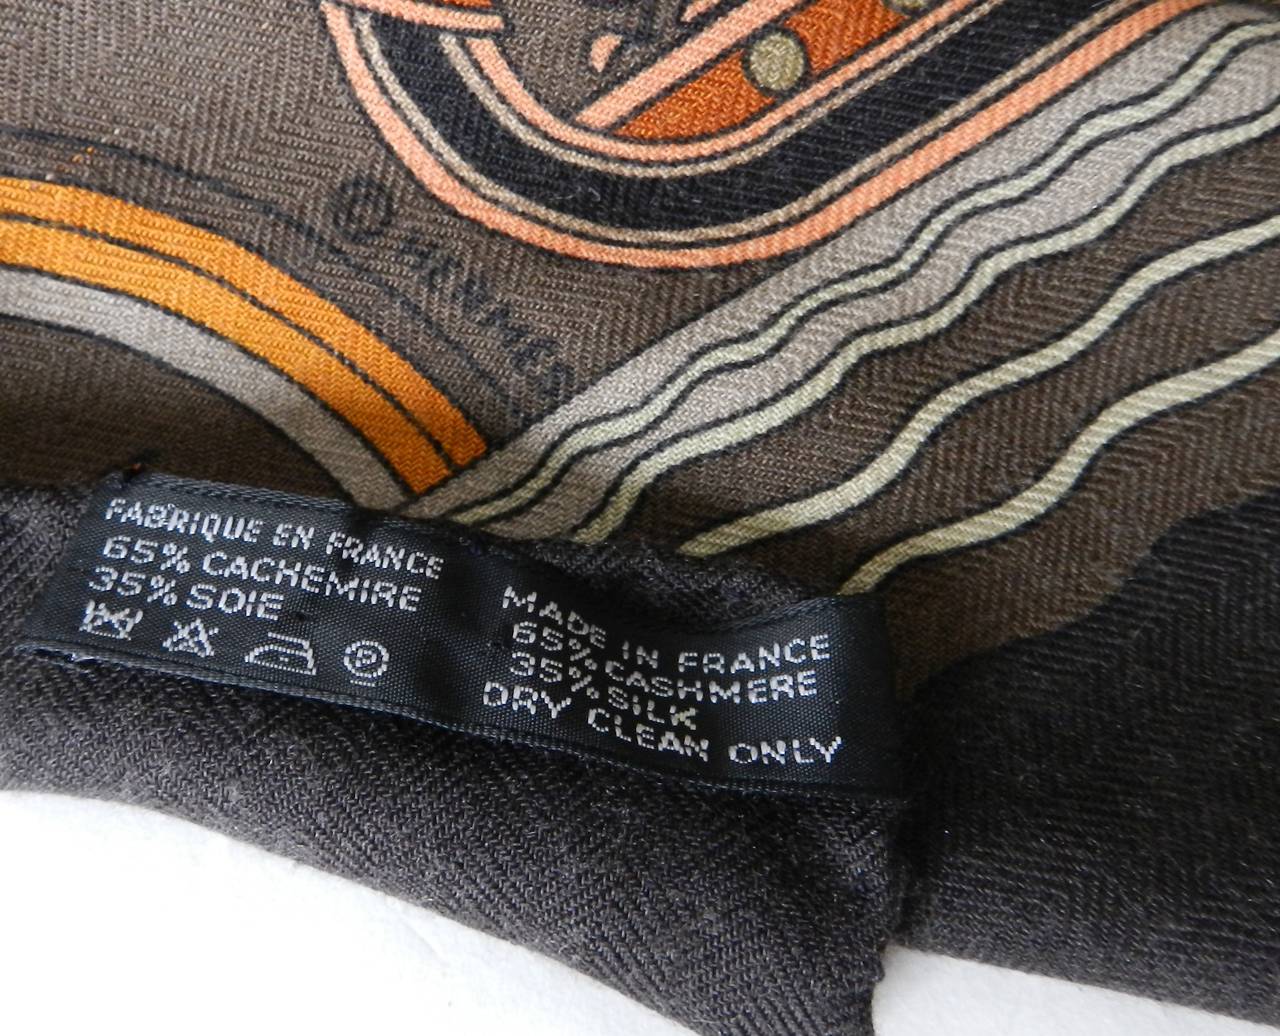 Hermes Large Brown Cashmere Shawl Scarf 52